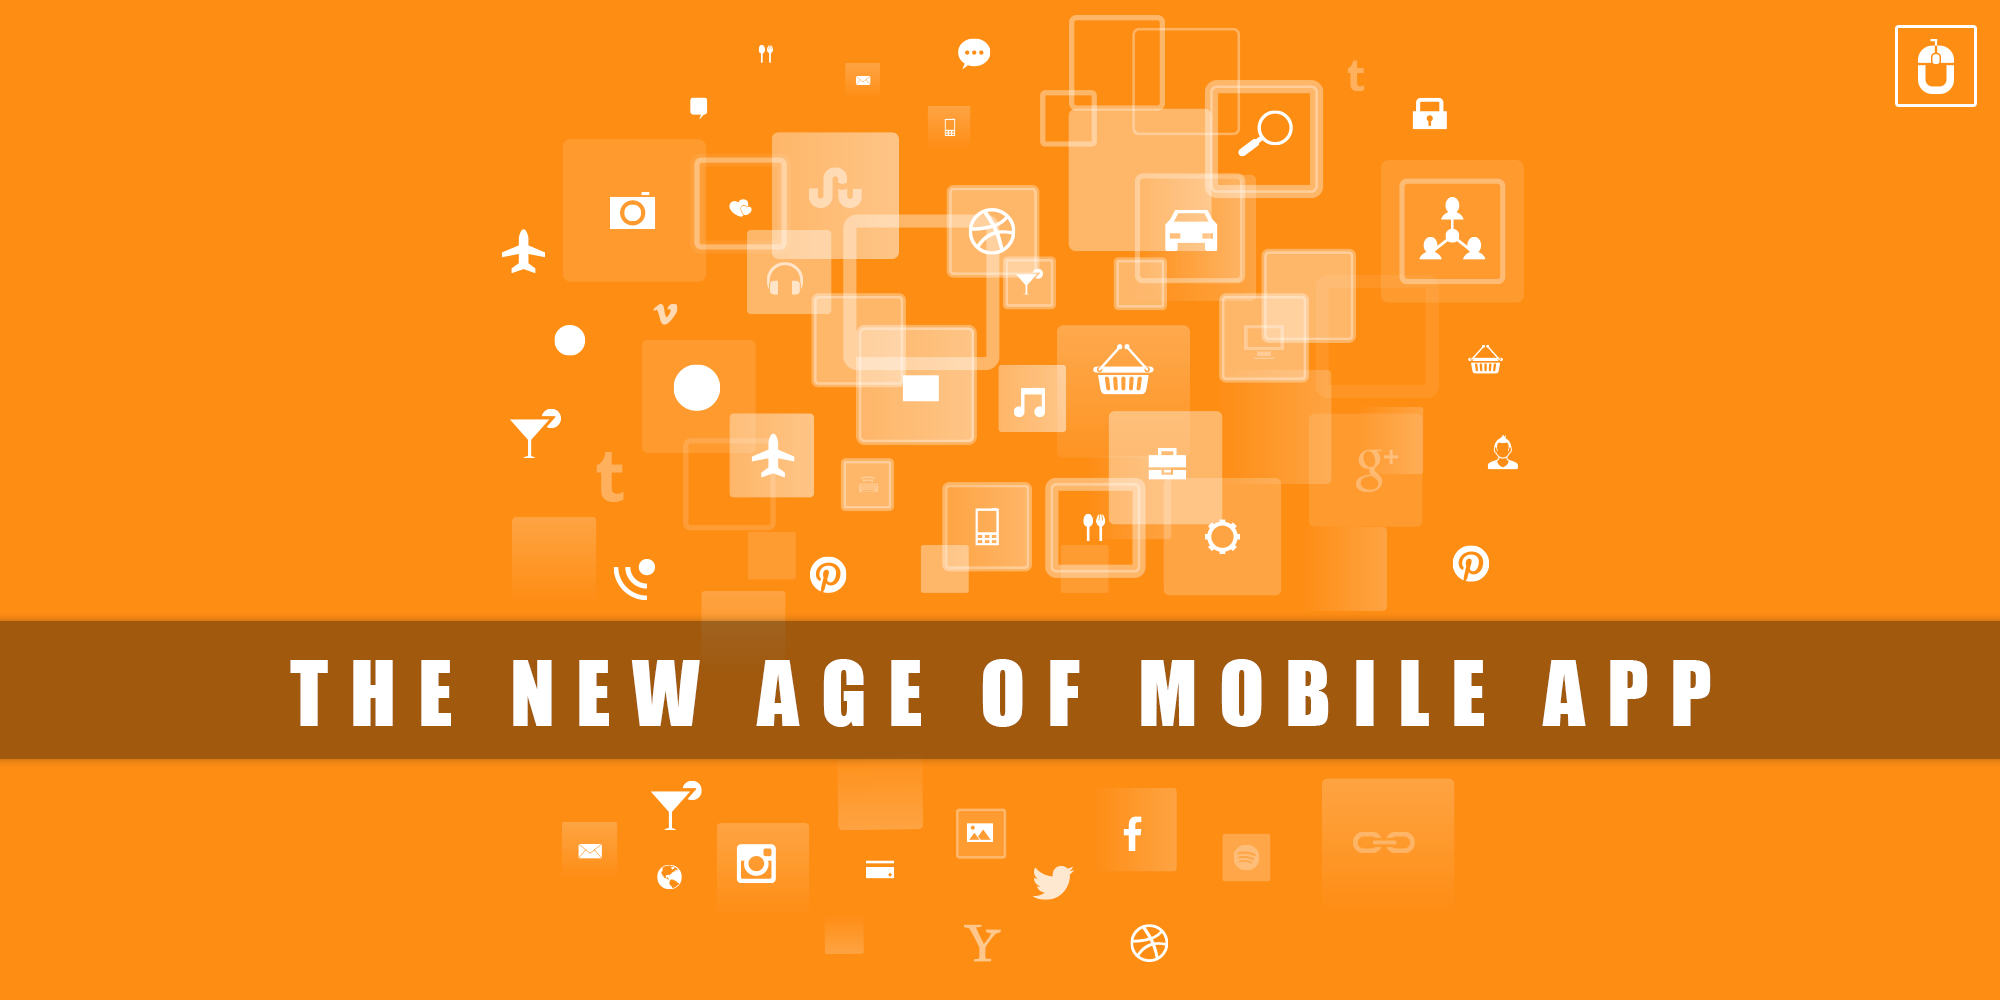 The New Age of Mobile App